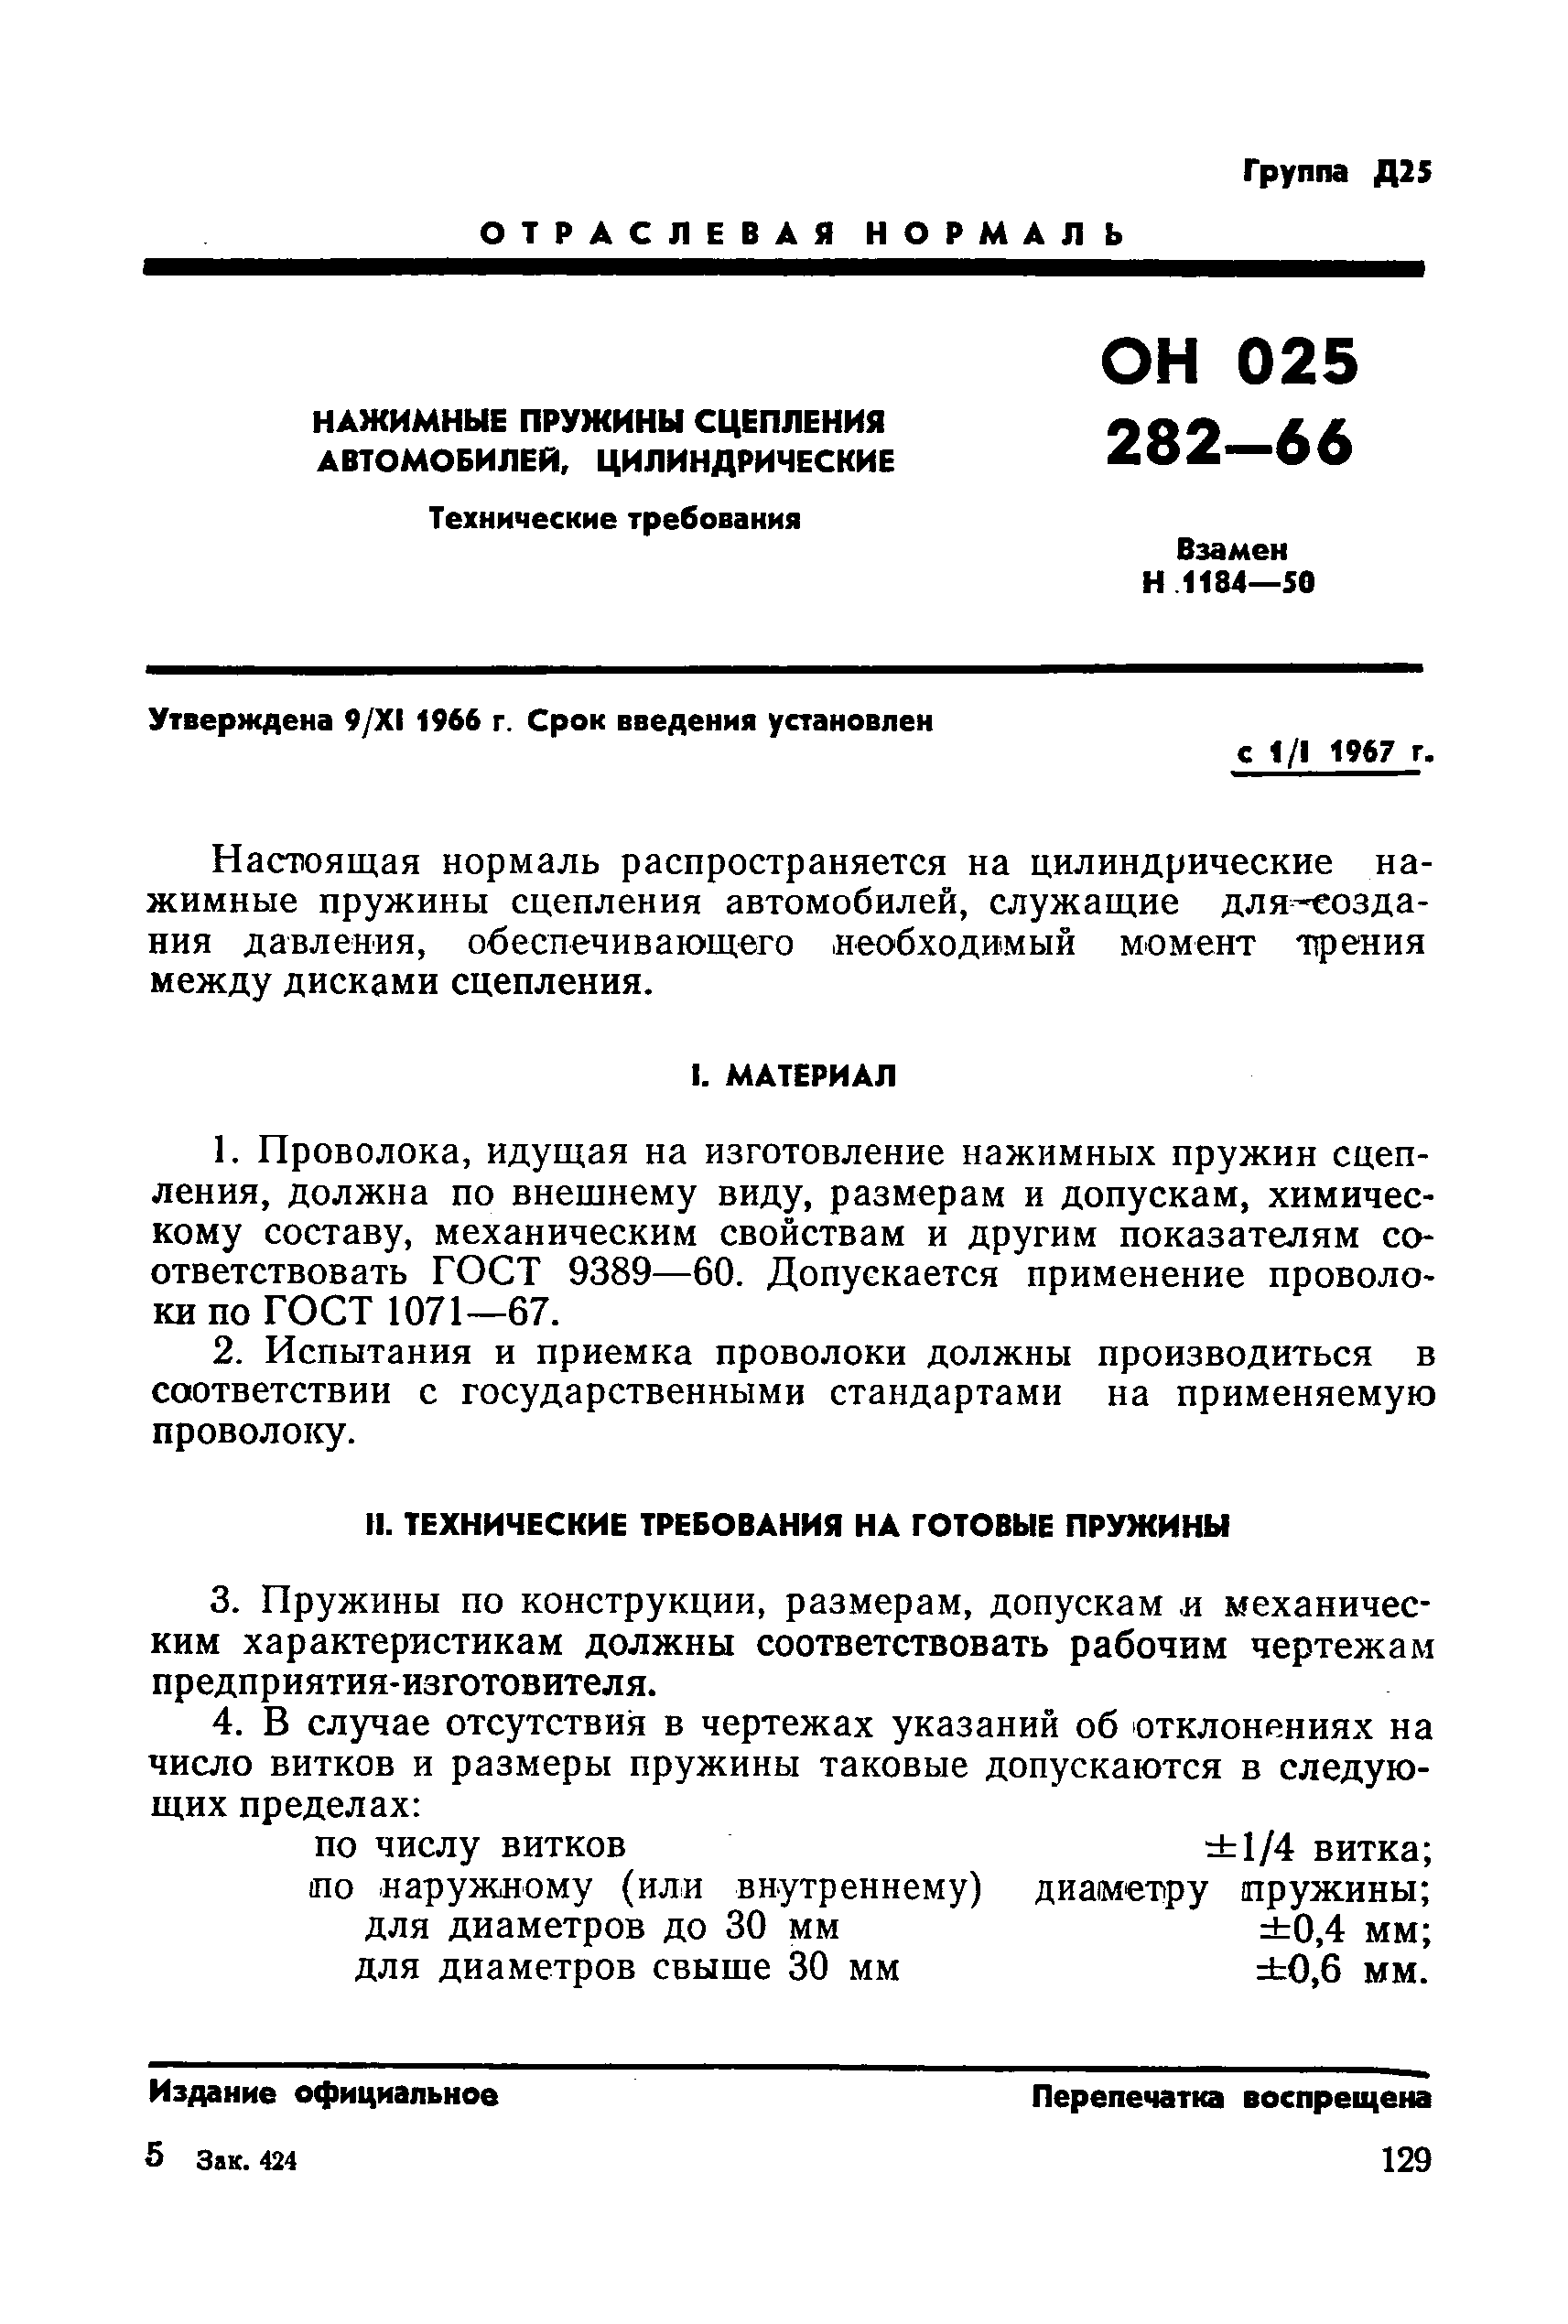 ОН 025 313-68